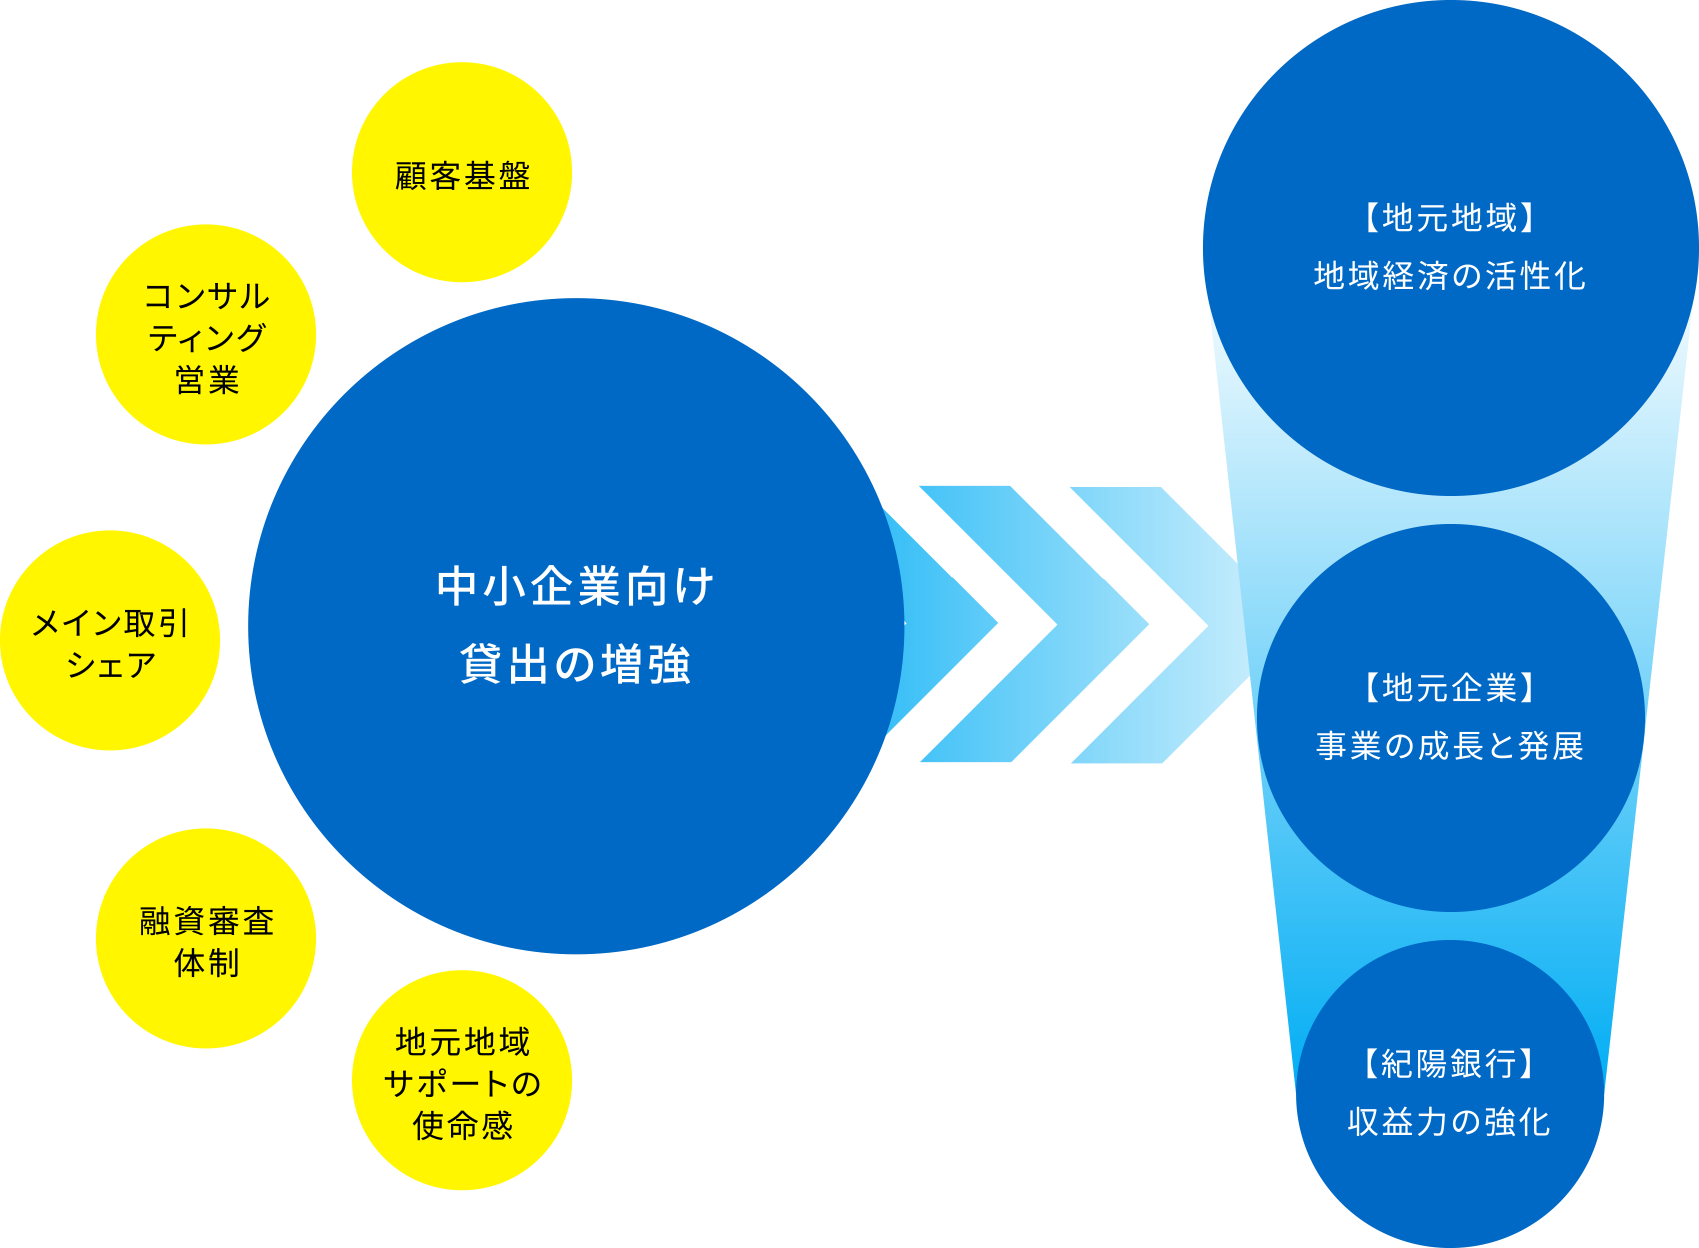 Images Of 紀陽銀行 Japaneseclass Jp